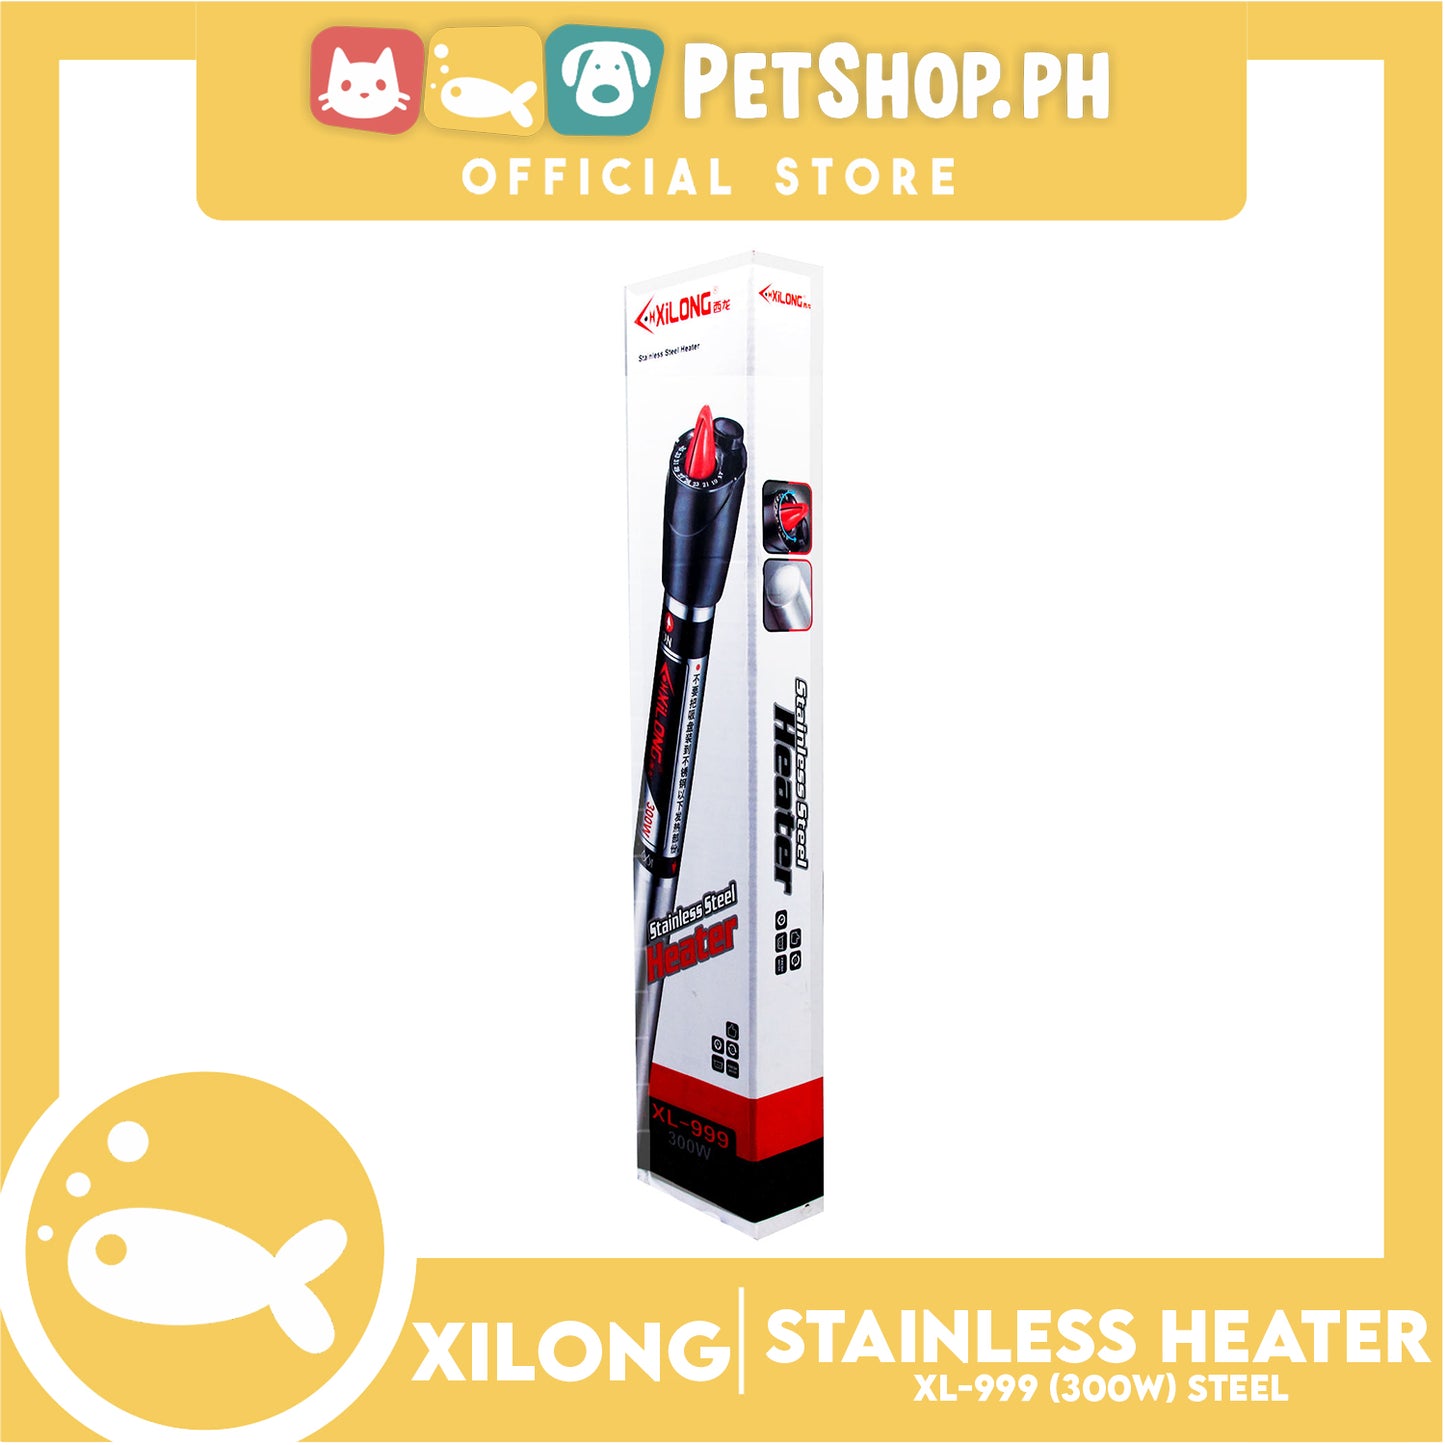 XL-999 Stainless Heater 300w